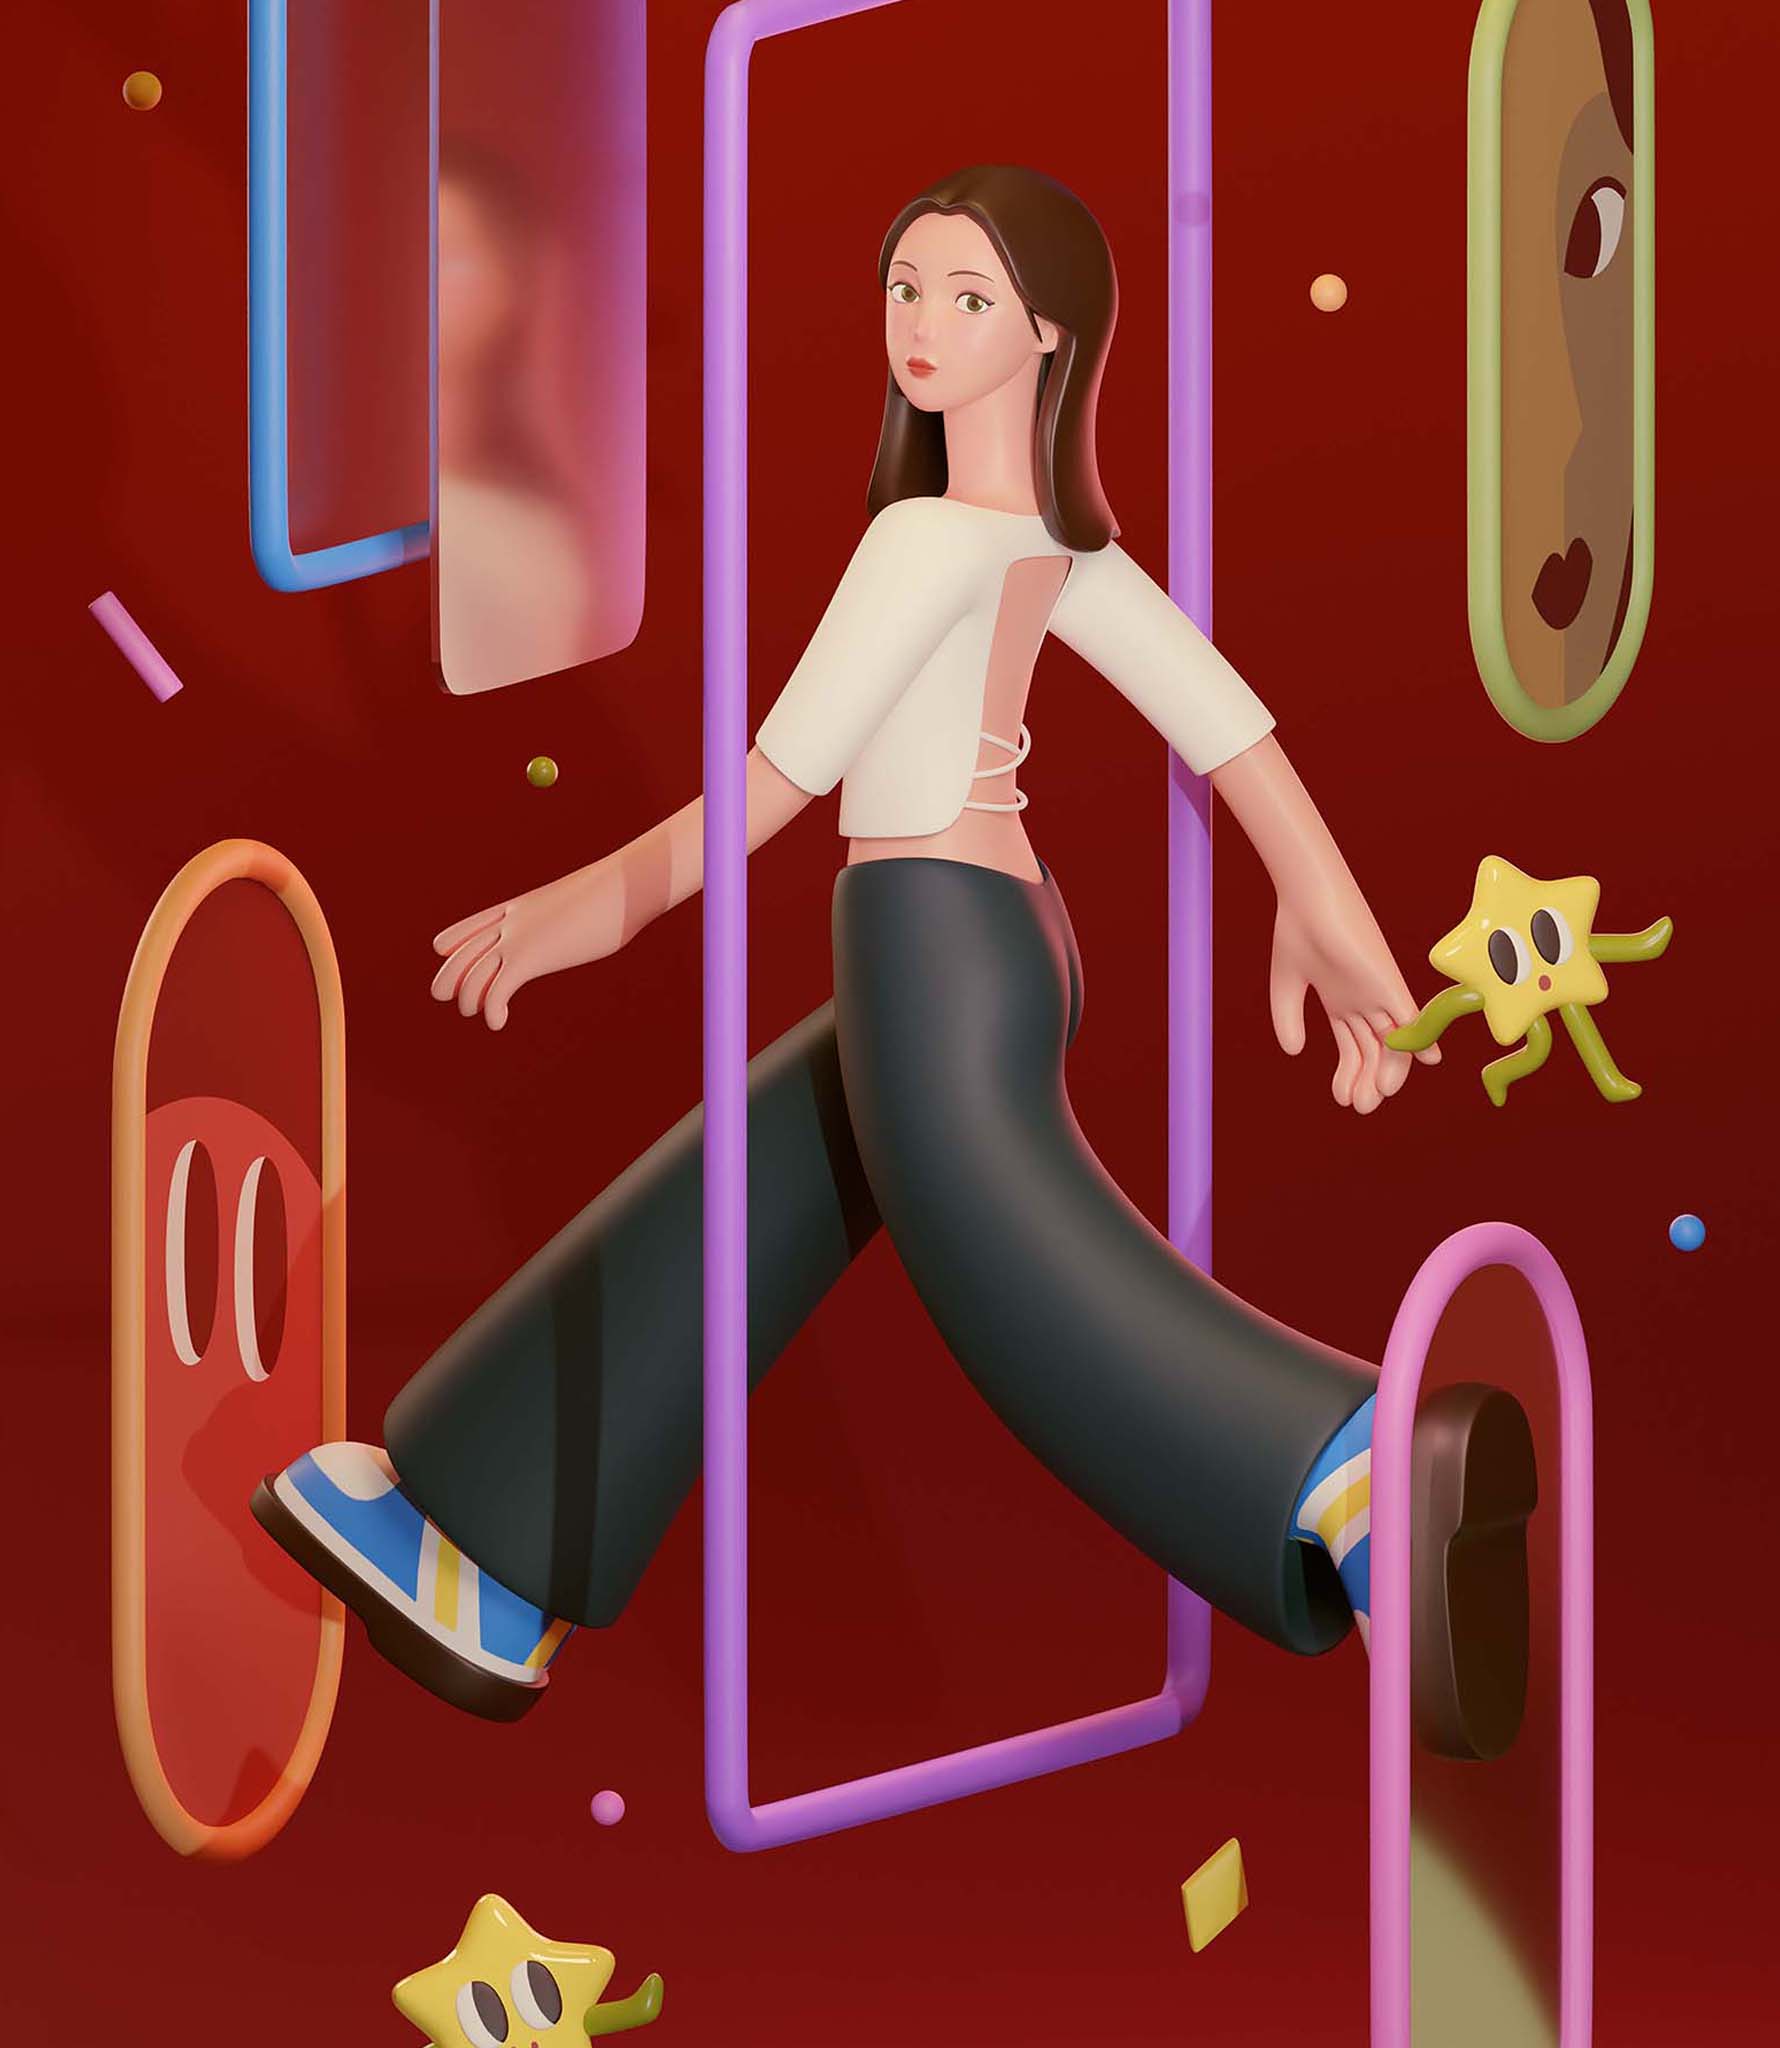 Illustration of A girl in an abstract and surreal background walking through a doorway